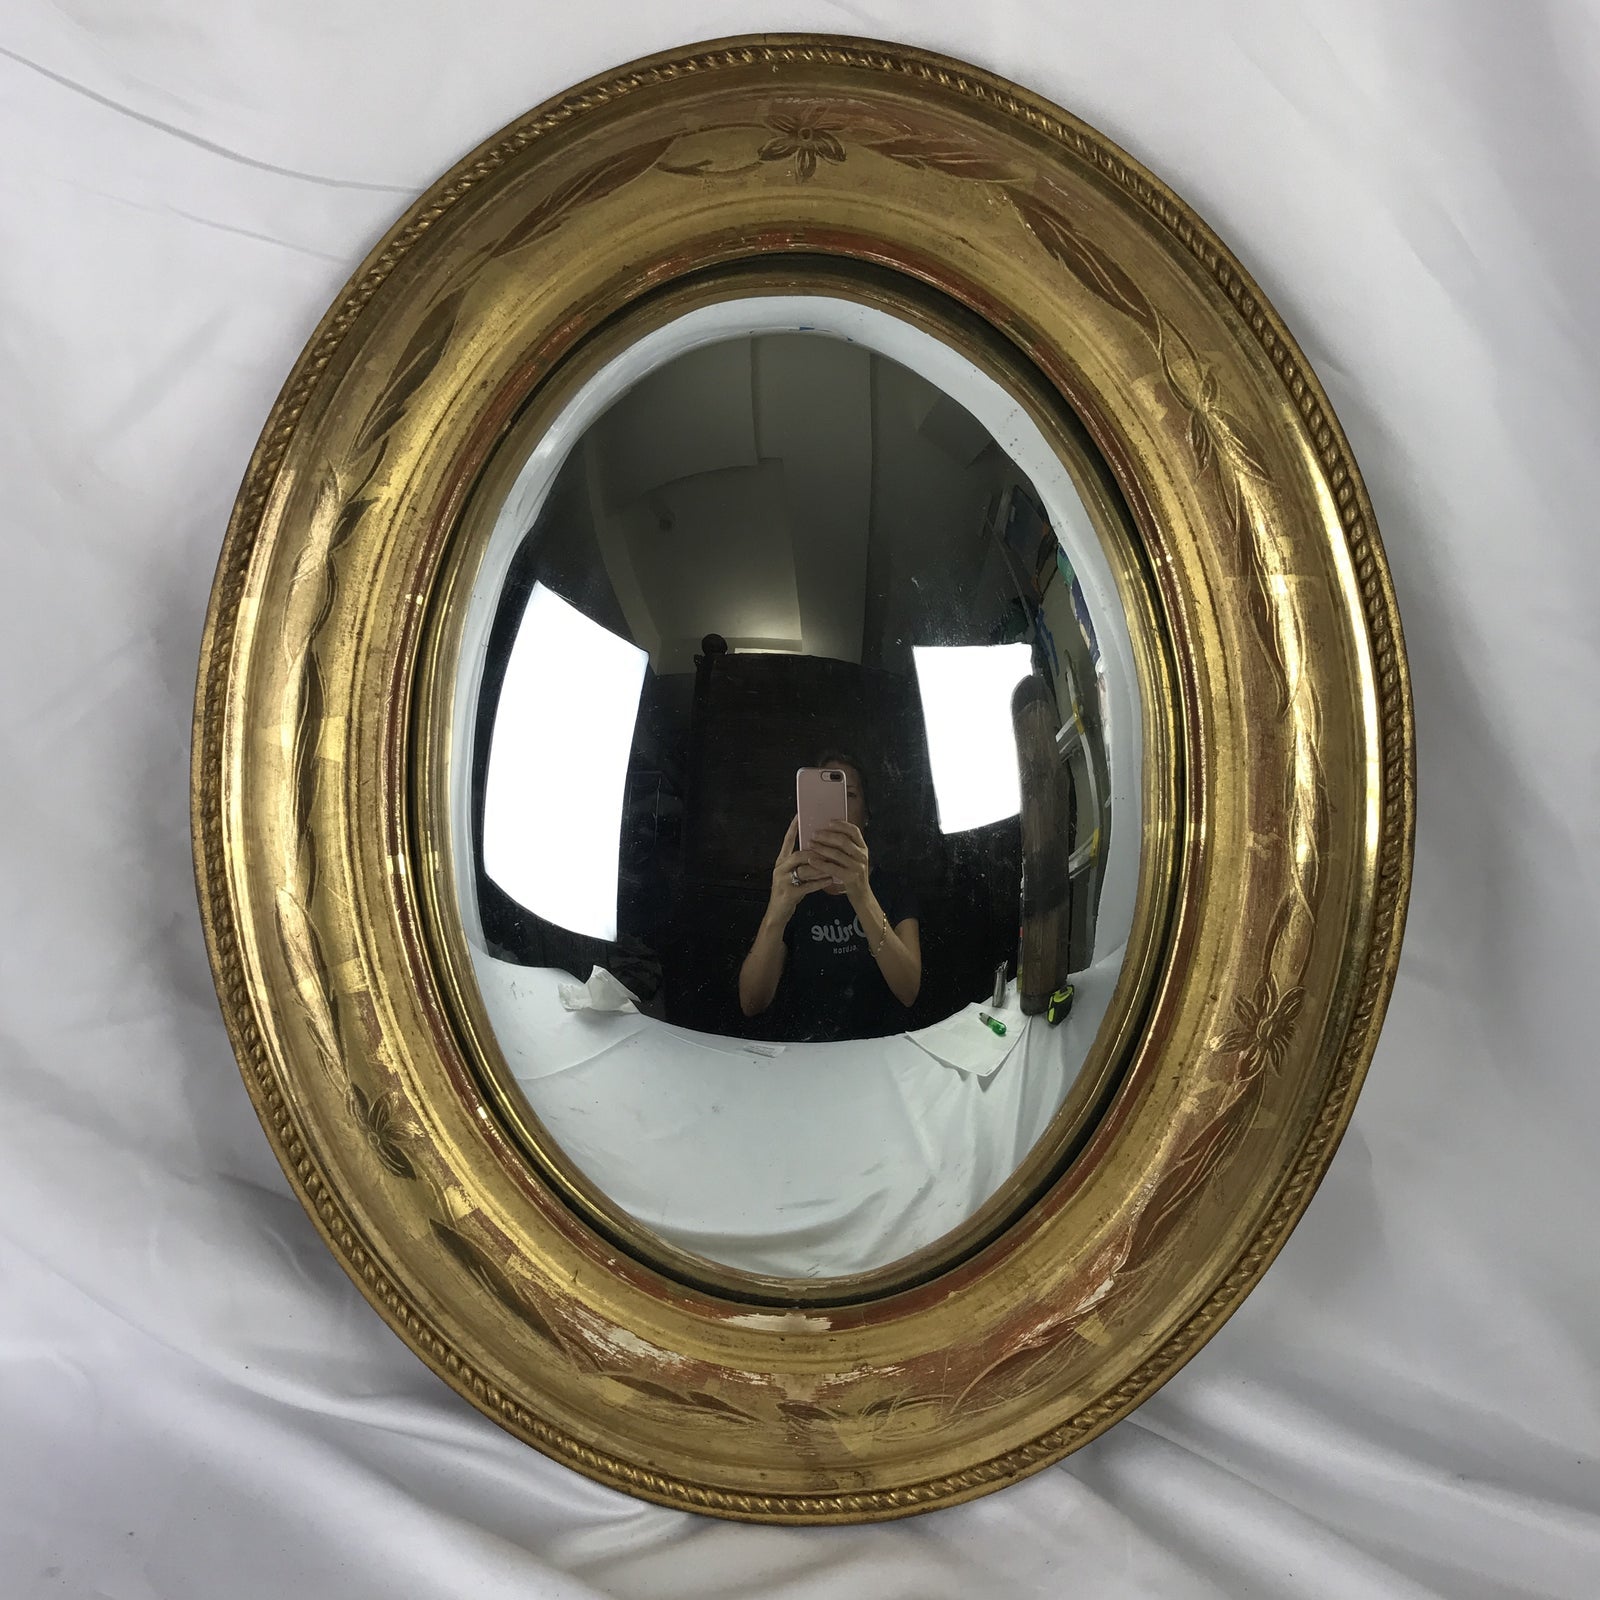 French Louis Philippe Oval Convex Mirror